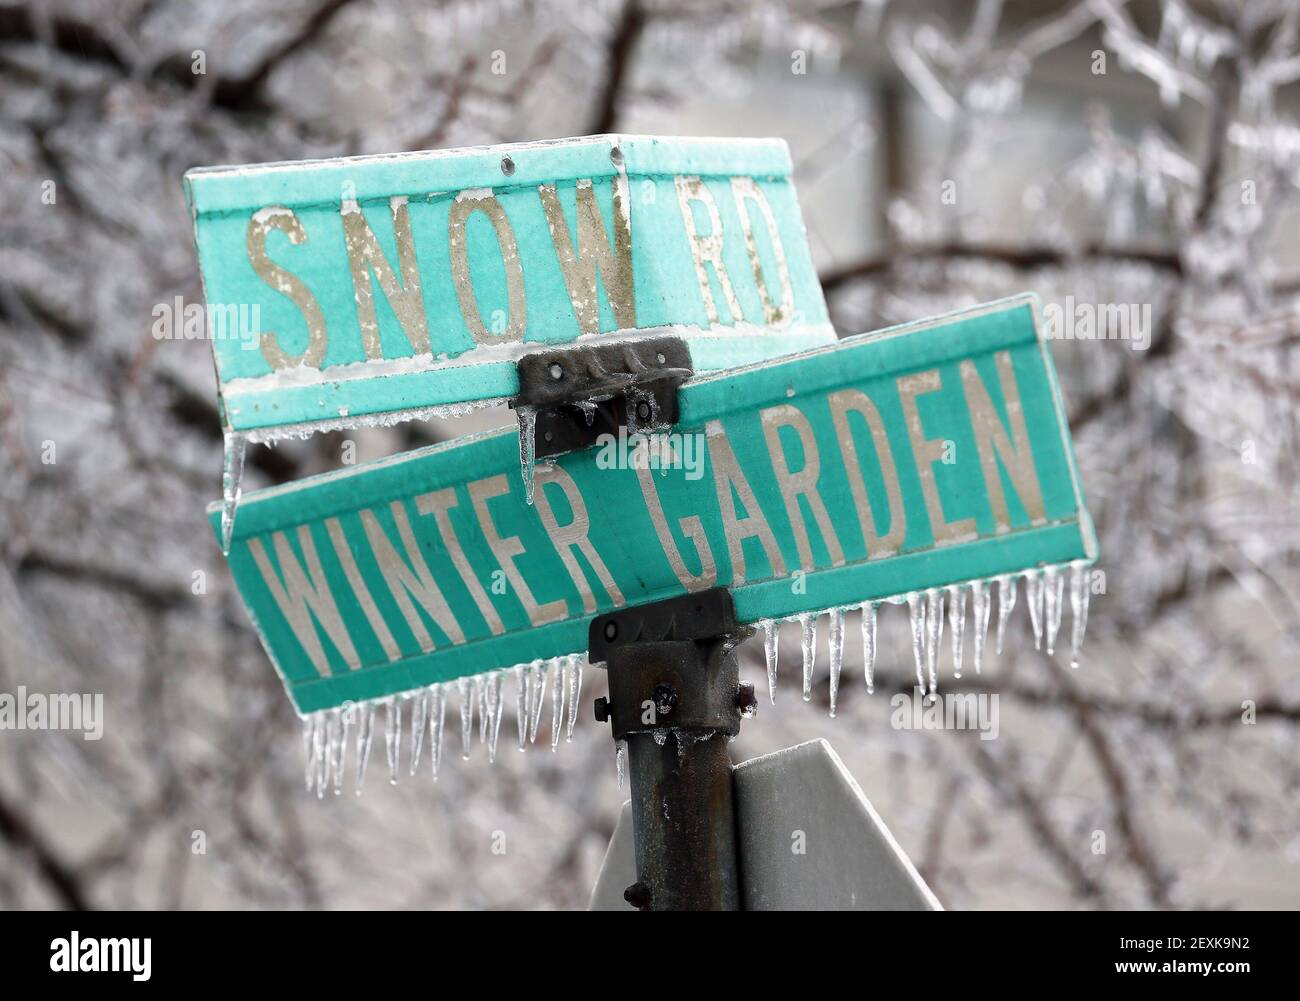 Icicles cling to the street signs for Snow Rd. and Winter Garden Dr. in Lexington, Ky., Wednesday, February 5, 2014. (Photo by Charles Bertram/Lexington Herald-Leader/MCT/Sipa USA) Stock Photo